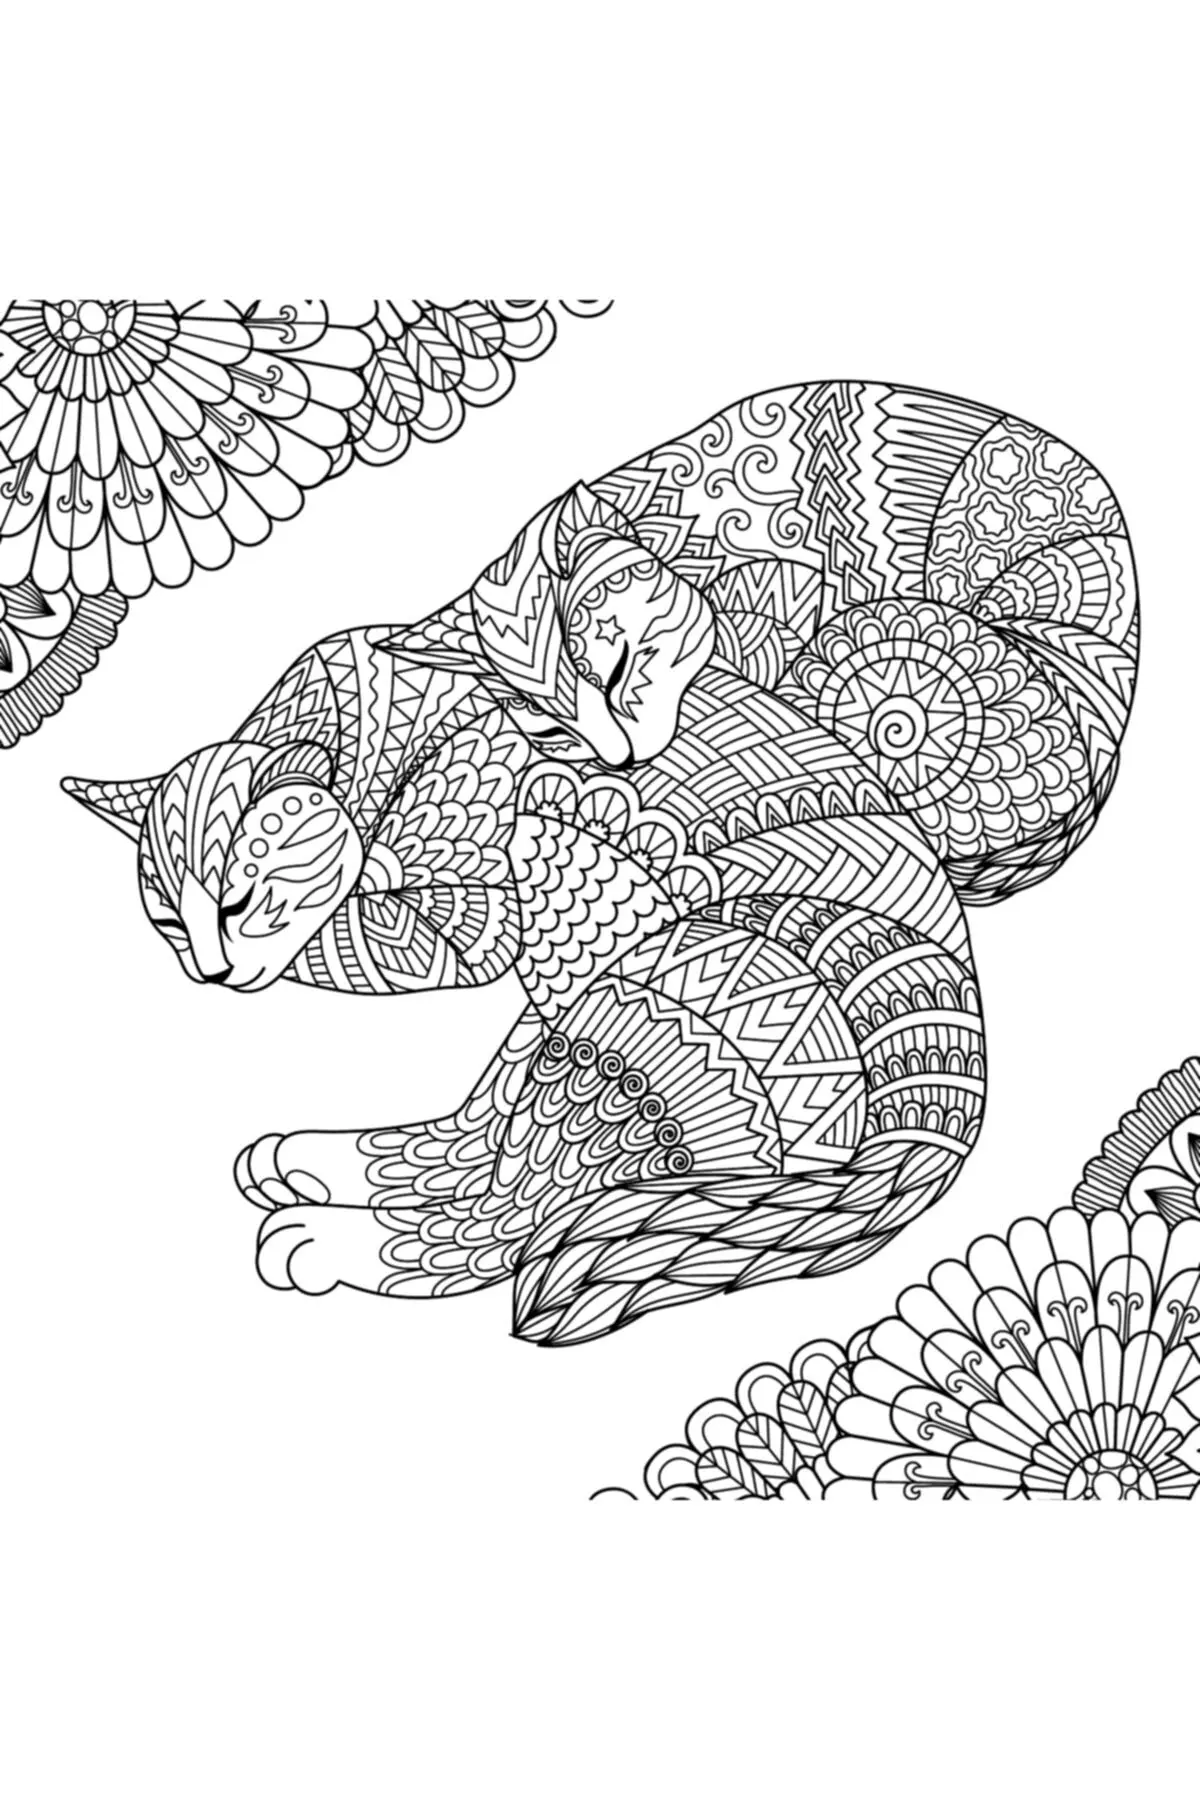 4pc 24 Page coloring book Enchanted Forest mandalas Animal kids Adult Coloring  Books For adults Livre drawing/Art/colouring Book